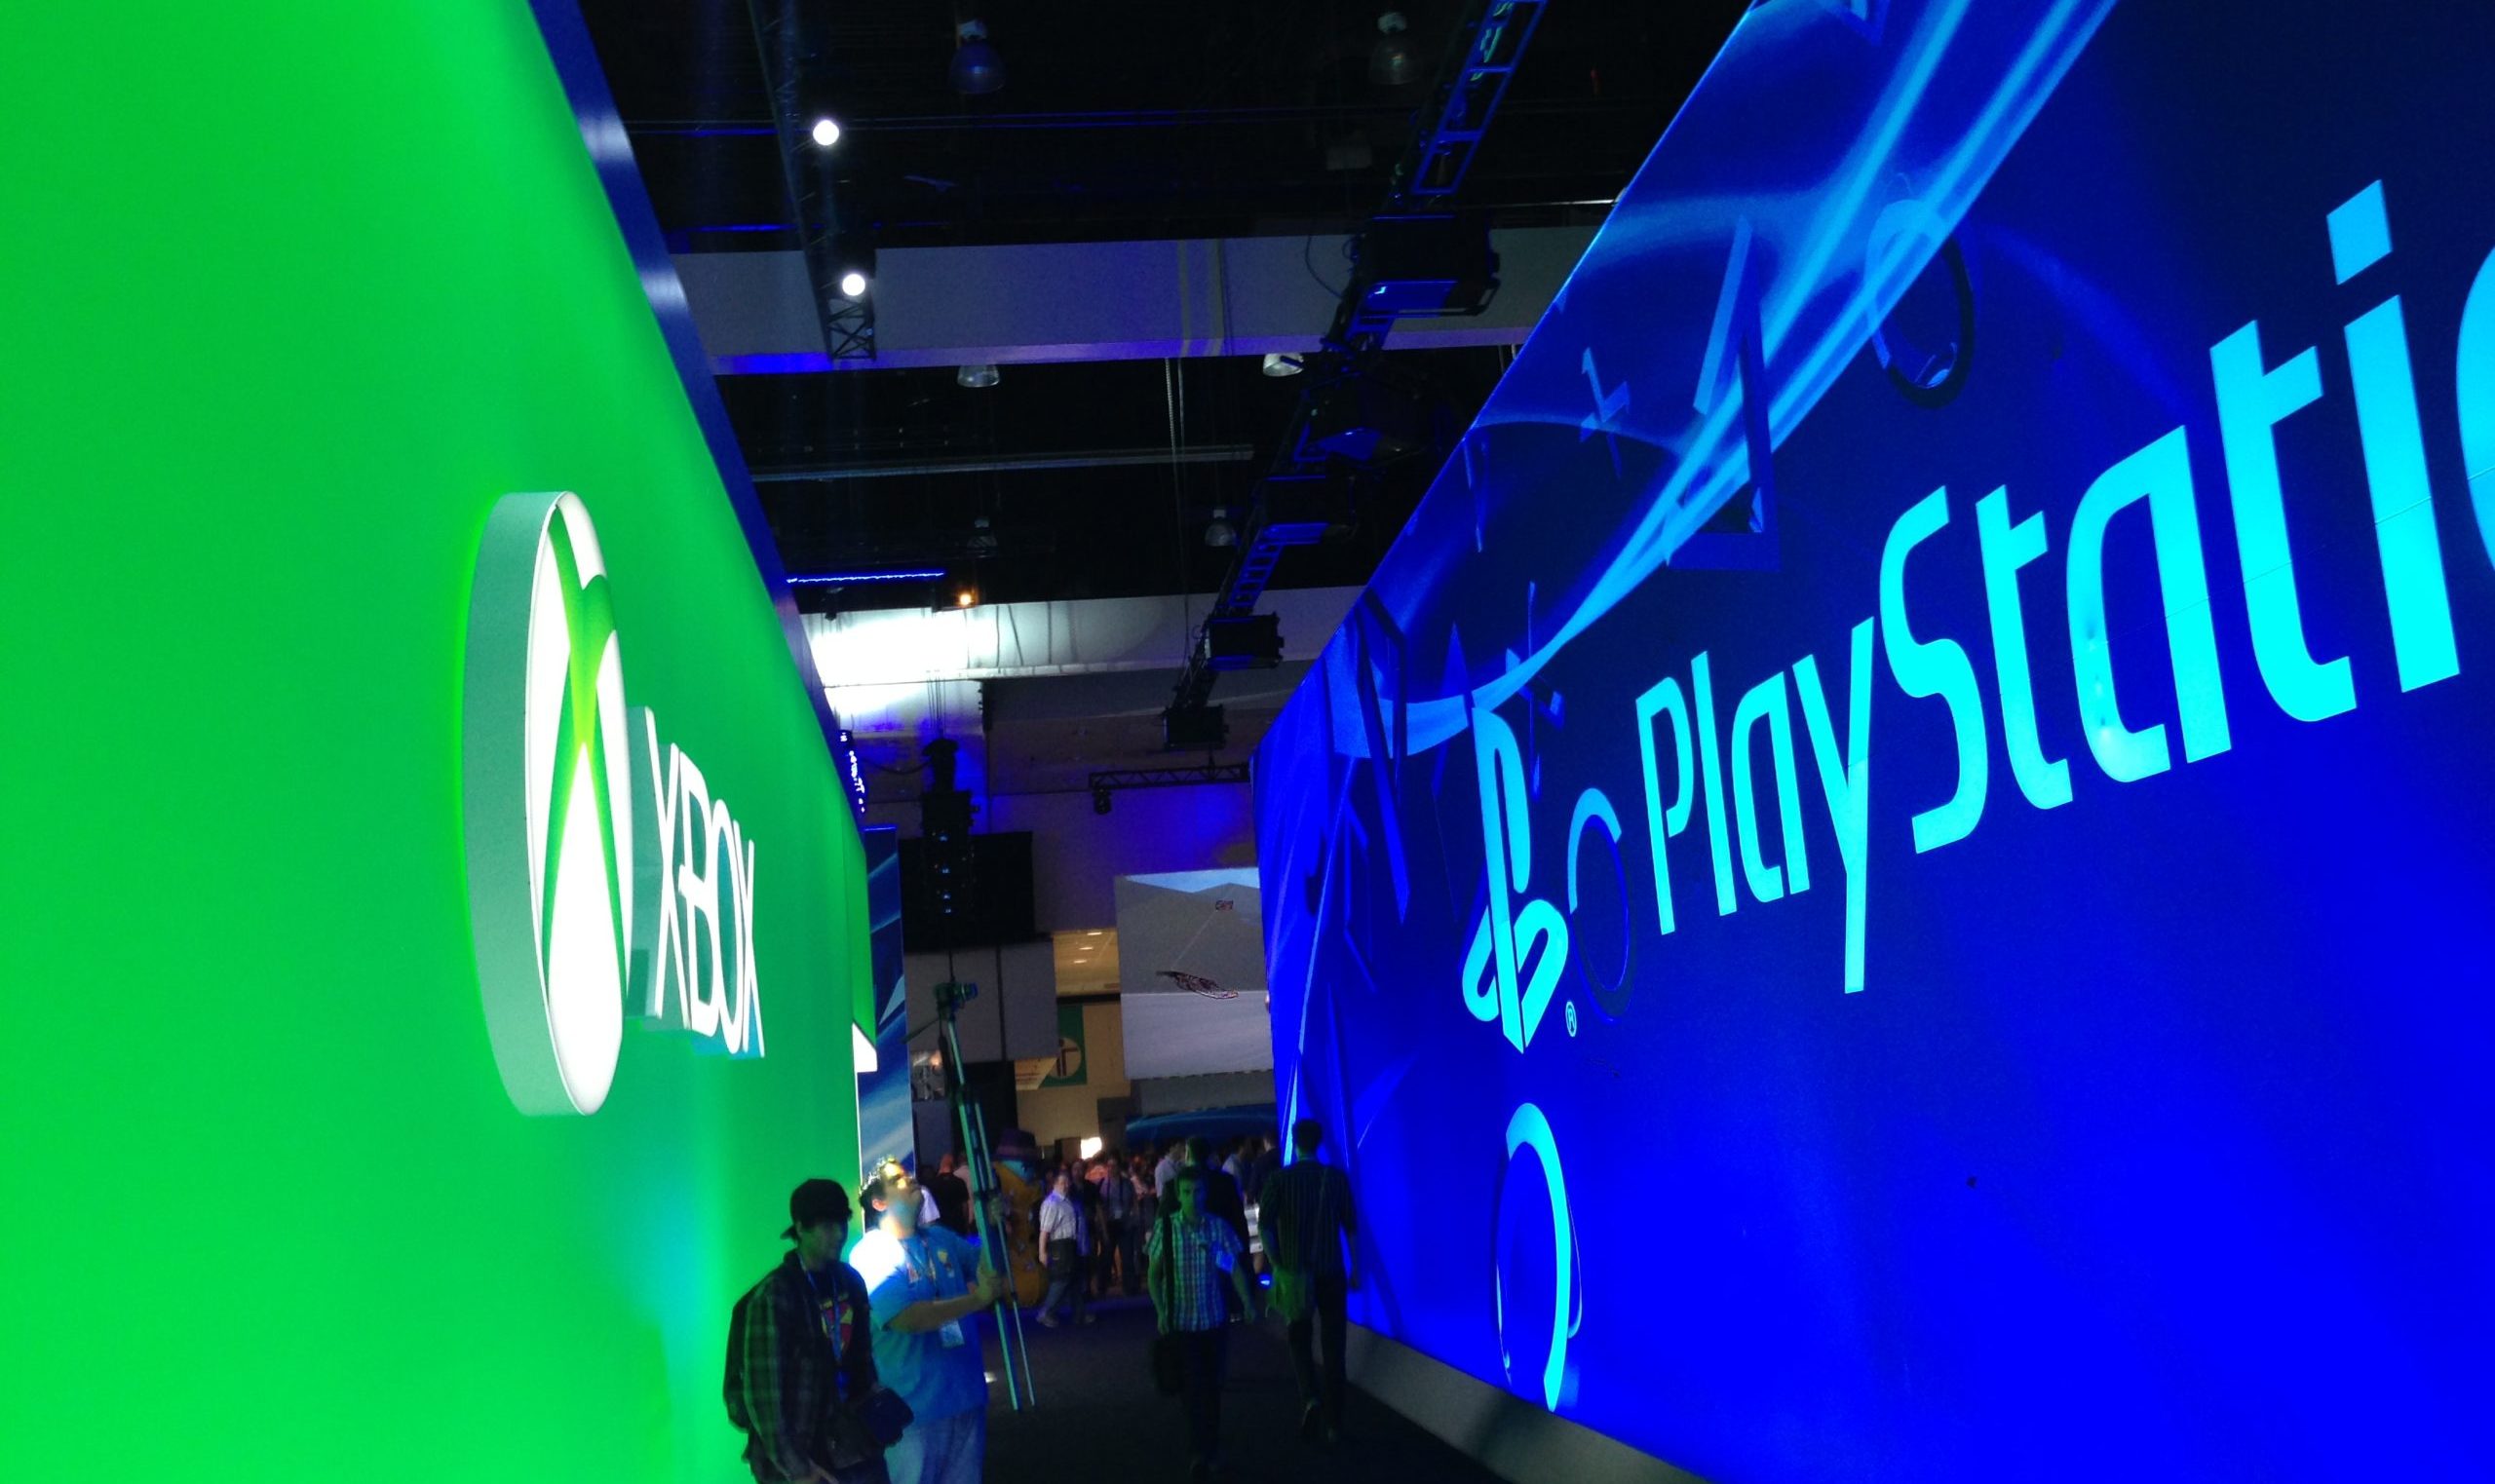 Phil Spencer Confirms Xbox Will Be at E3 2020 - IGN